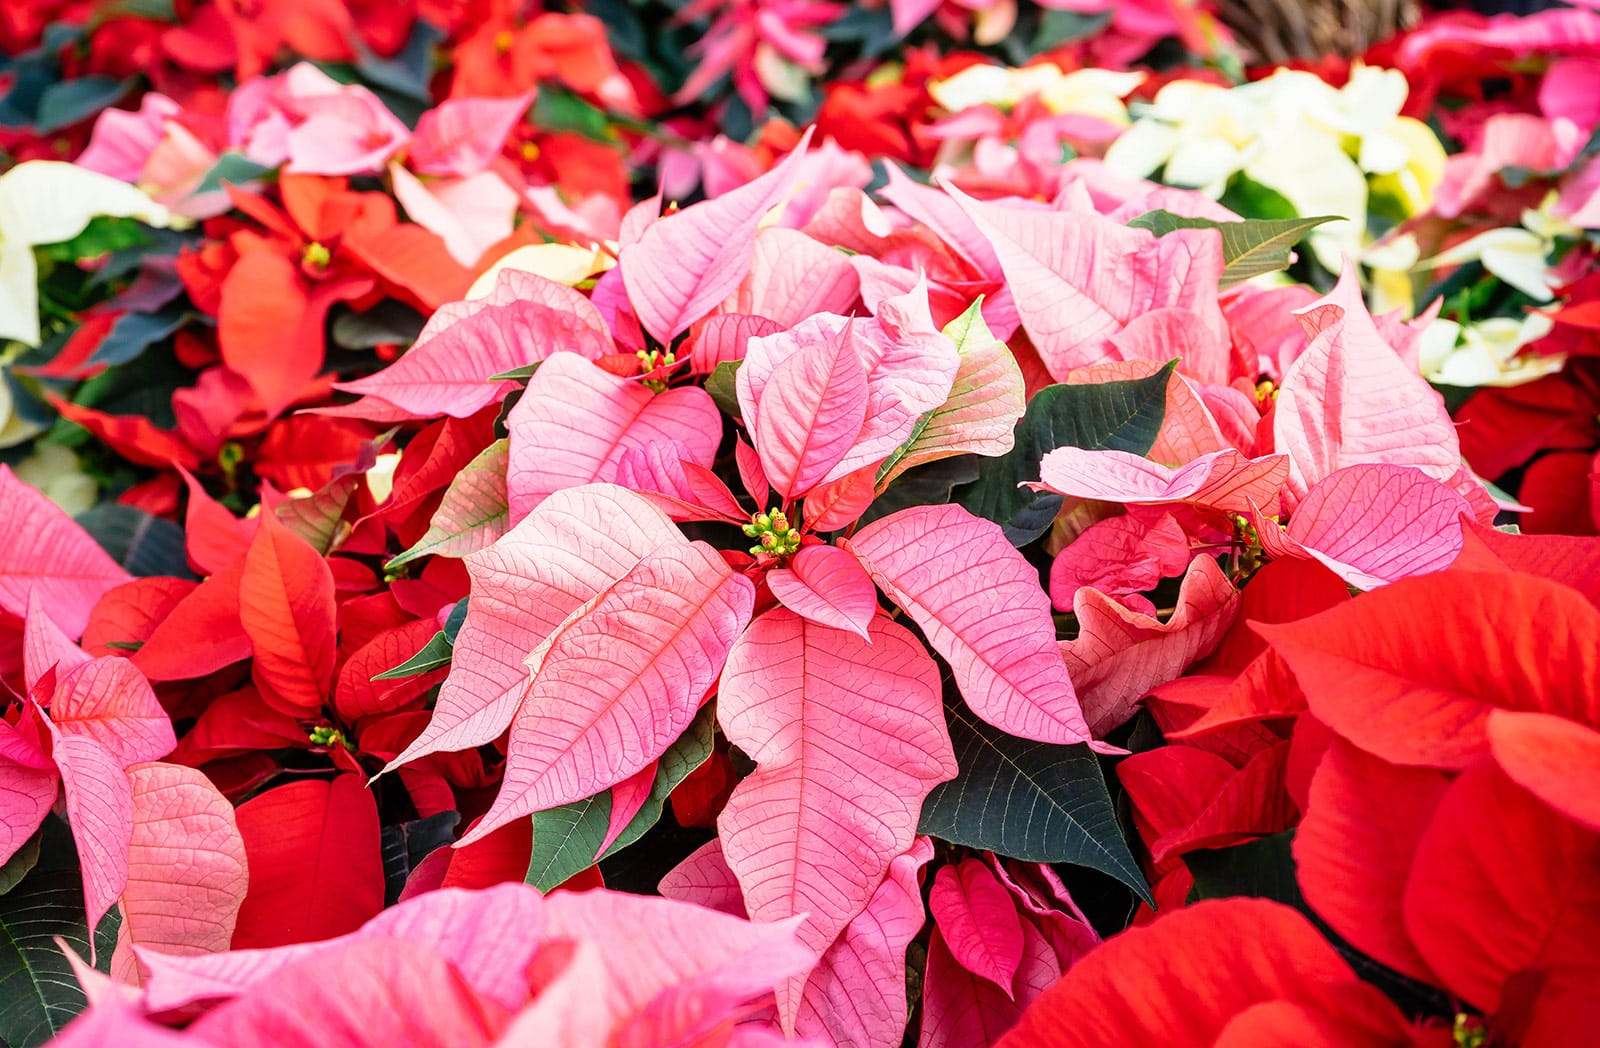 Keep your poinsettia looking good this holiday season (and beyond)